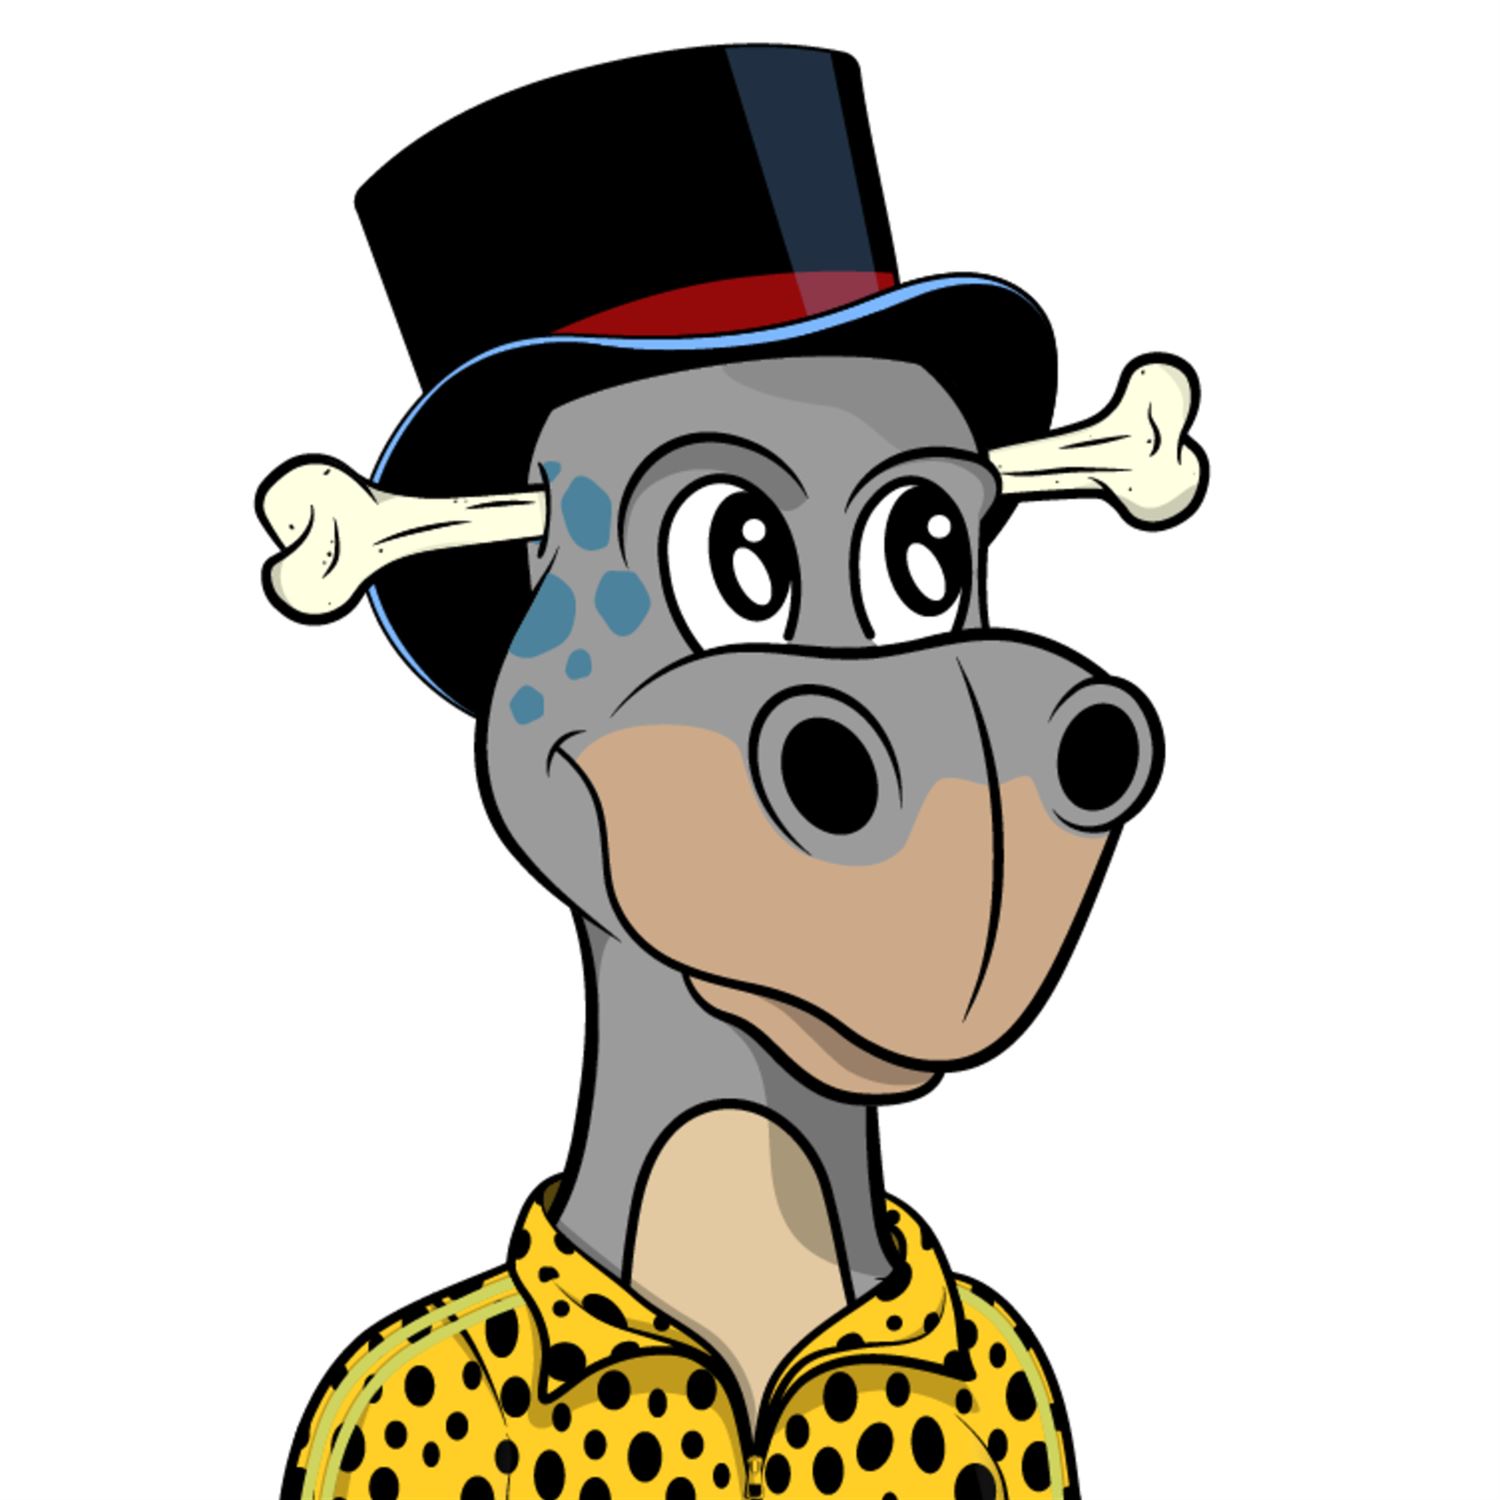 Dapper Dinos & the complexity of blockchains